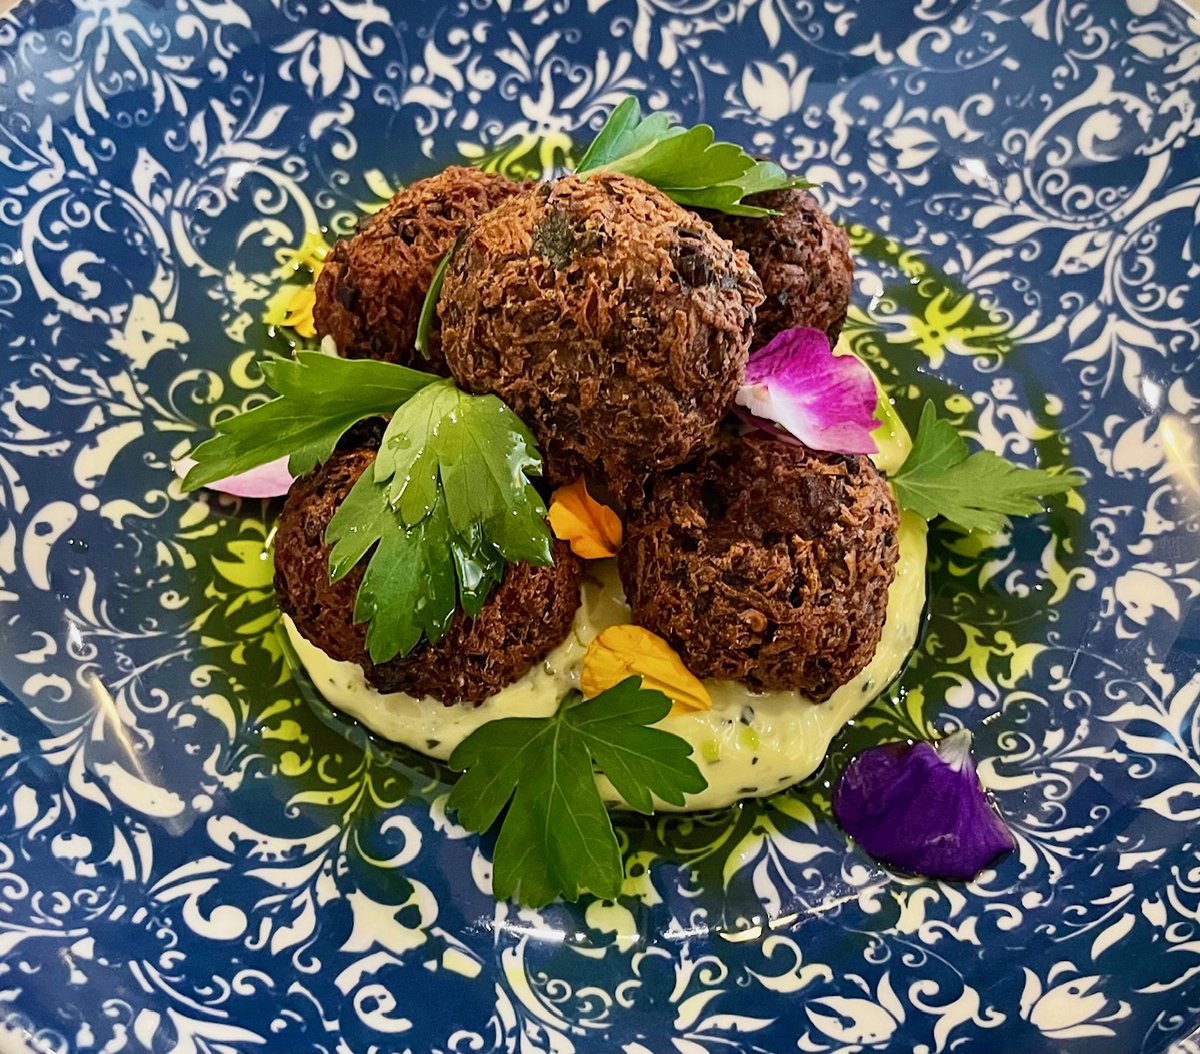 Chef Gregory Gourdet makes phenomenal Haitian cuisine at Kann in Portland, Oregon. The Akra, taro root fritters with remoulade, were spectacular. @kannrestaurant @UpscaleLivingMg @TravelOregon #LuxuryTravel #luxurylifestyle #gourmetcuisine #foodieheaven #luxurylife #gourmet